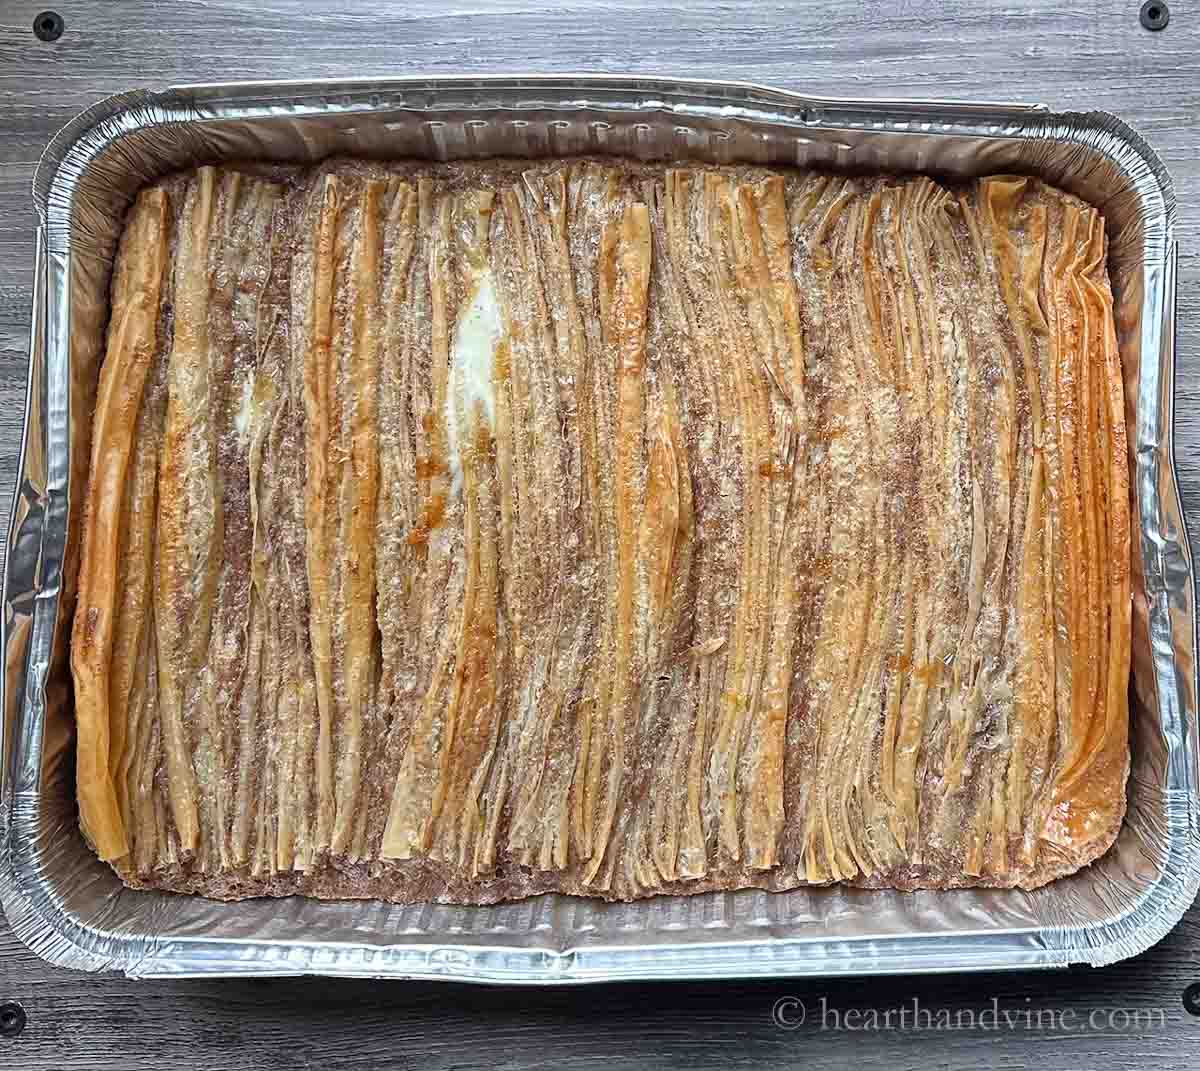 Crinkle cake from the oven.